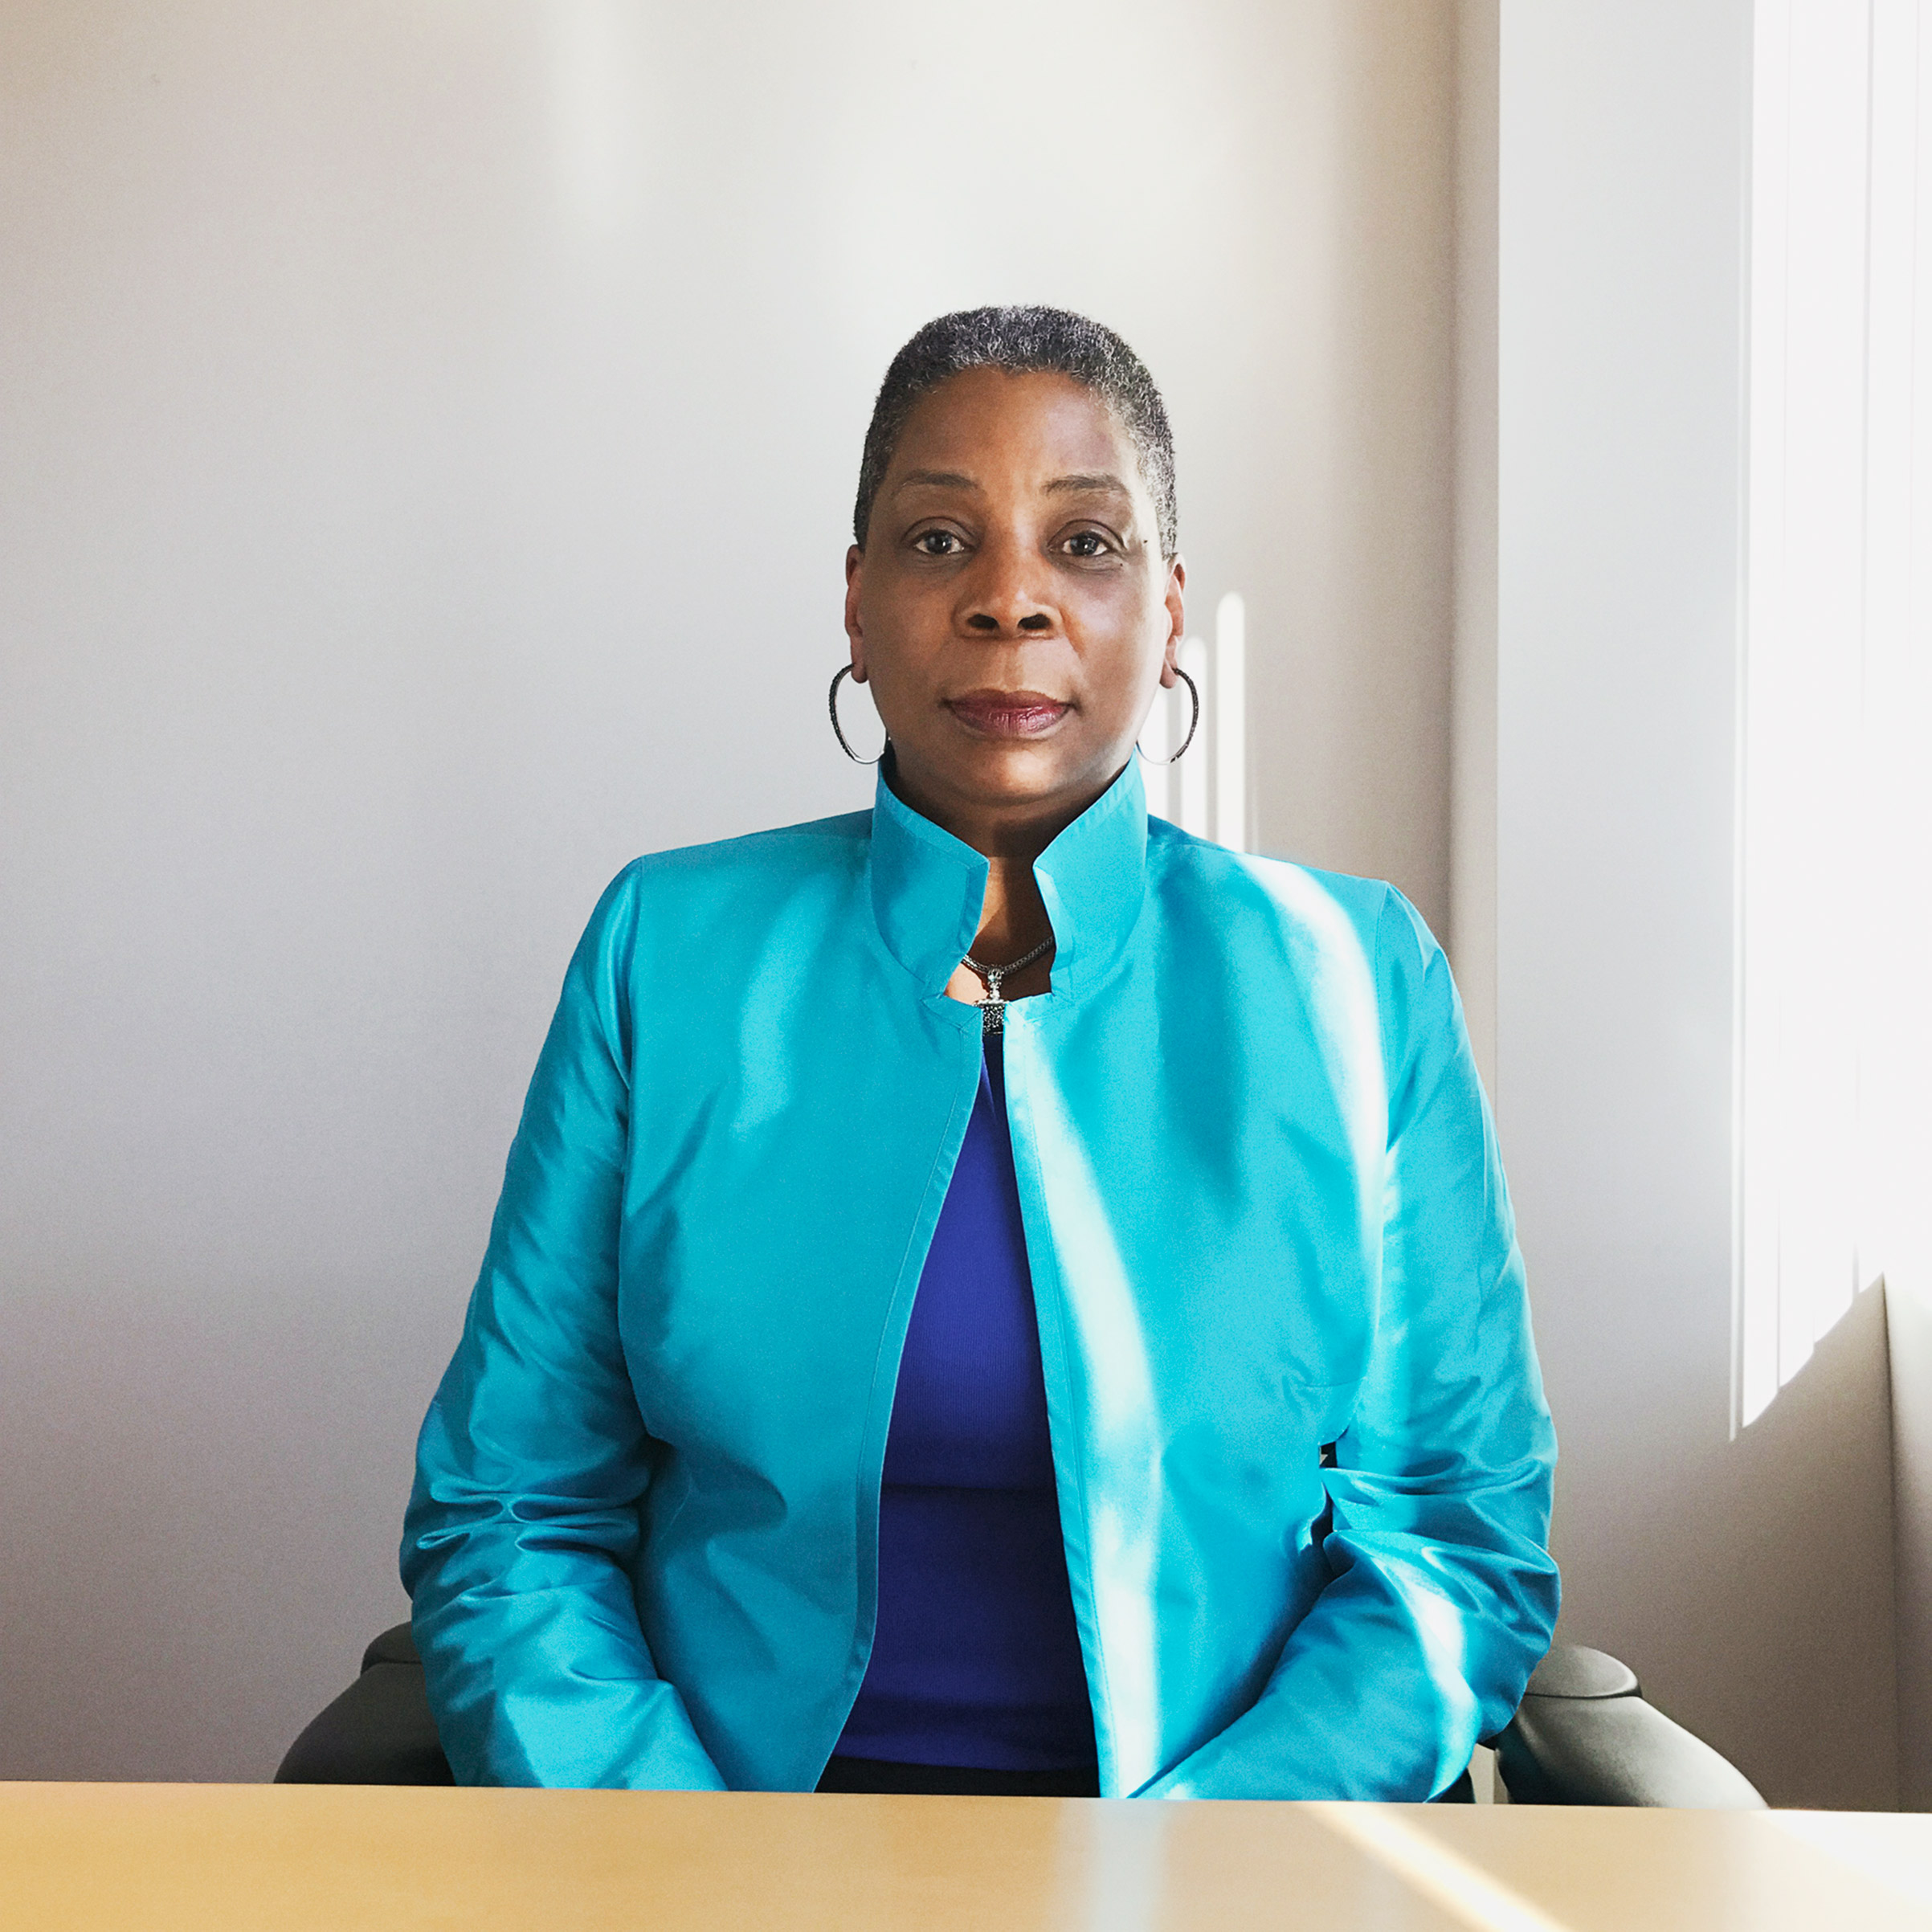 Portrait of Ursula Burns, photographed in the Xerox office in Stamford CT, November 11, 2016. (Luisa Dörr for TIME)